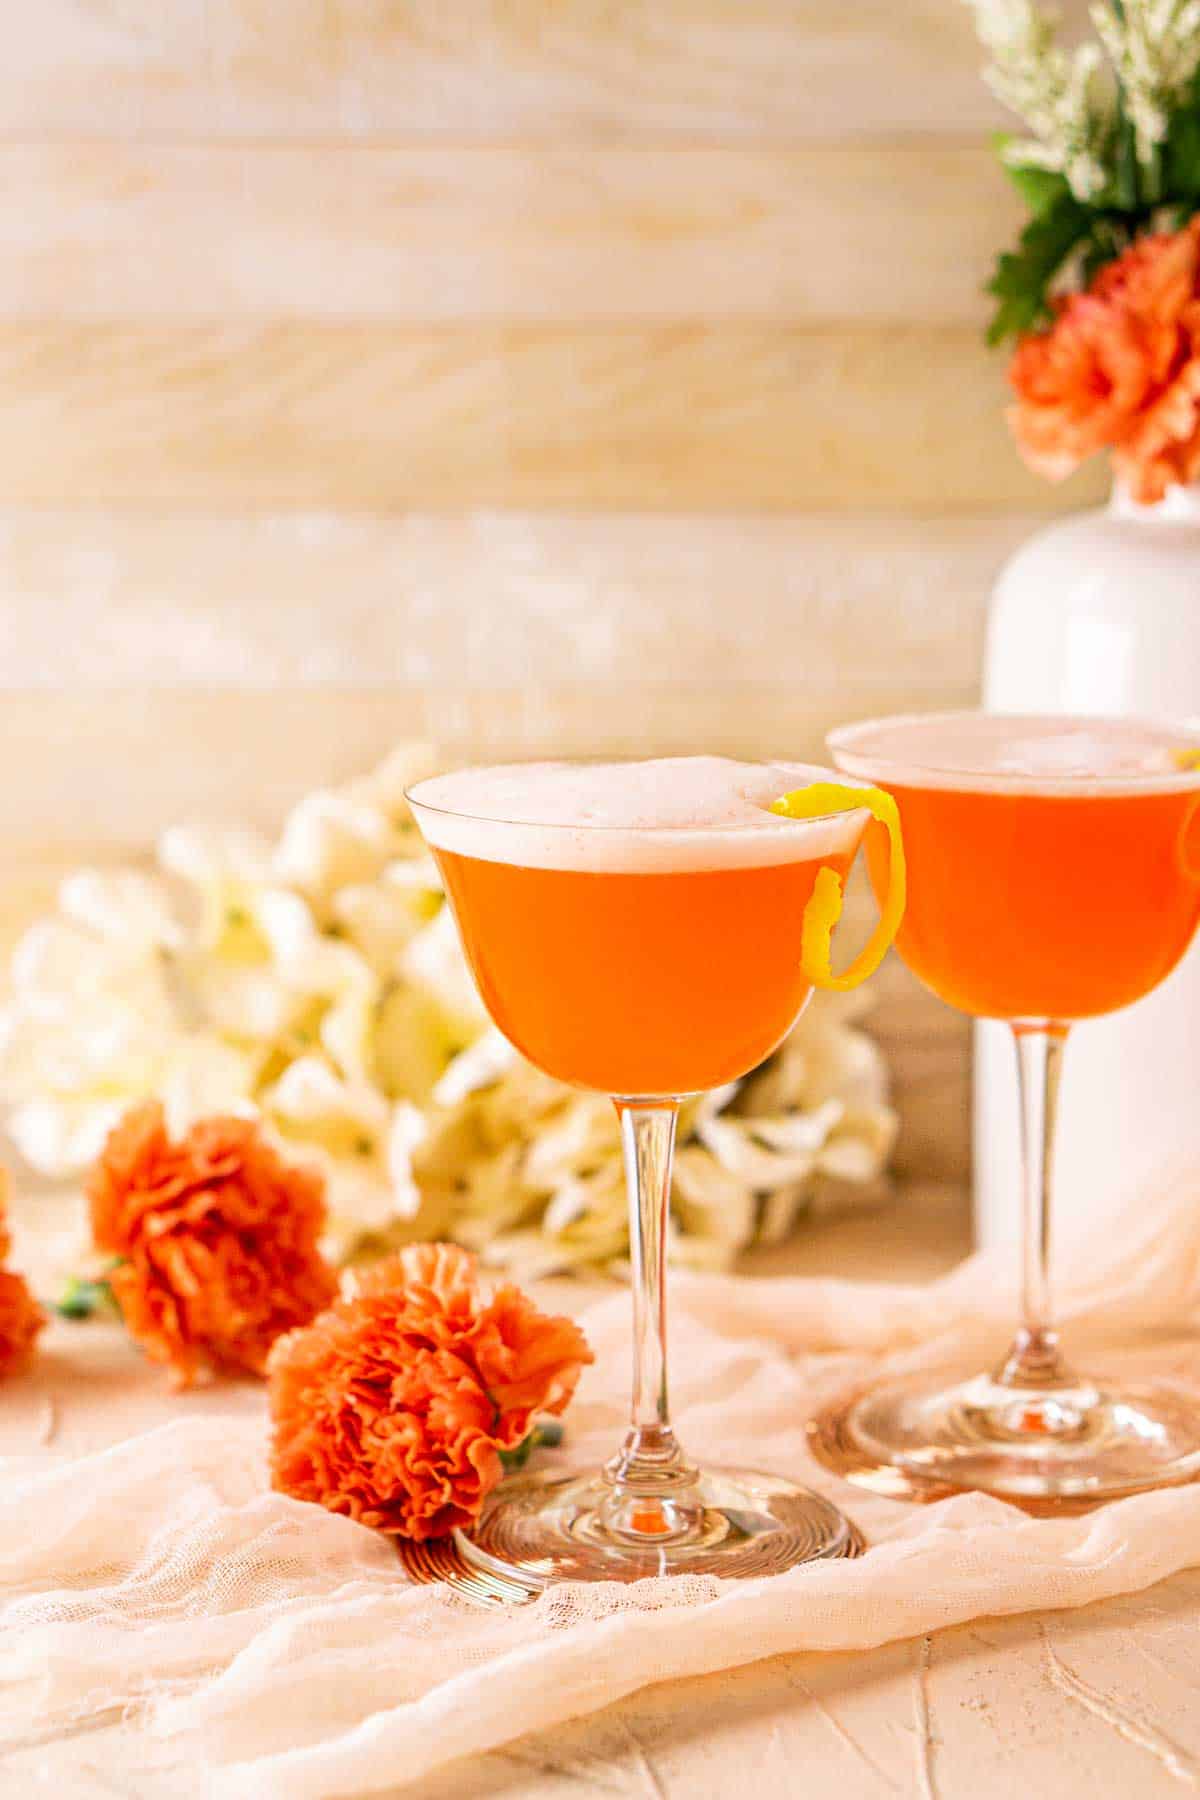 Looking straight on to an Aperol sour with a white vase next to it with orange and white flowers.